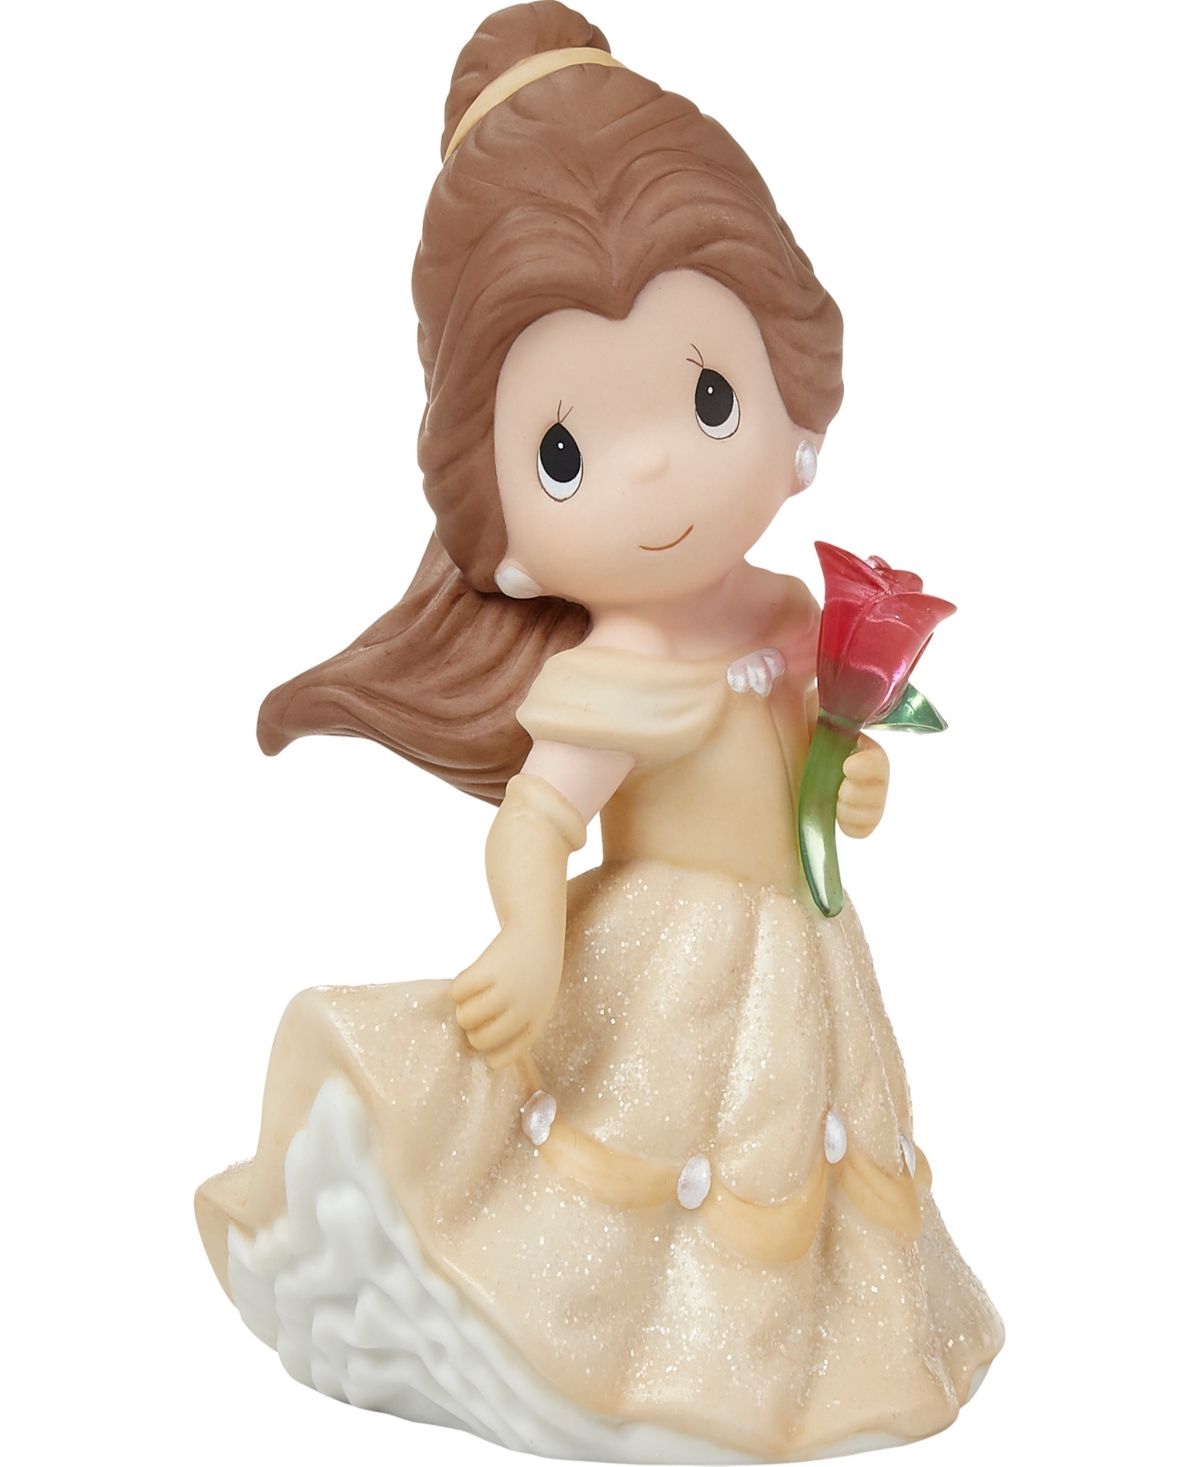 Precious Moments 222028 An Enchanting Moment Awaits Disney Belle Bisque Porcelain And Resin Figurine In Multicolored